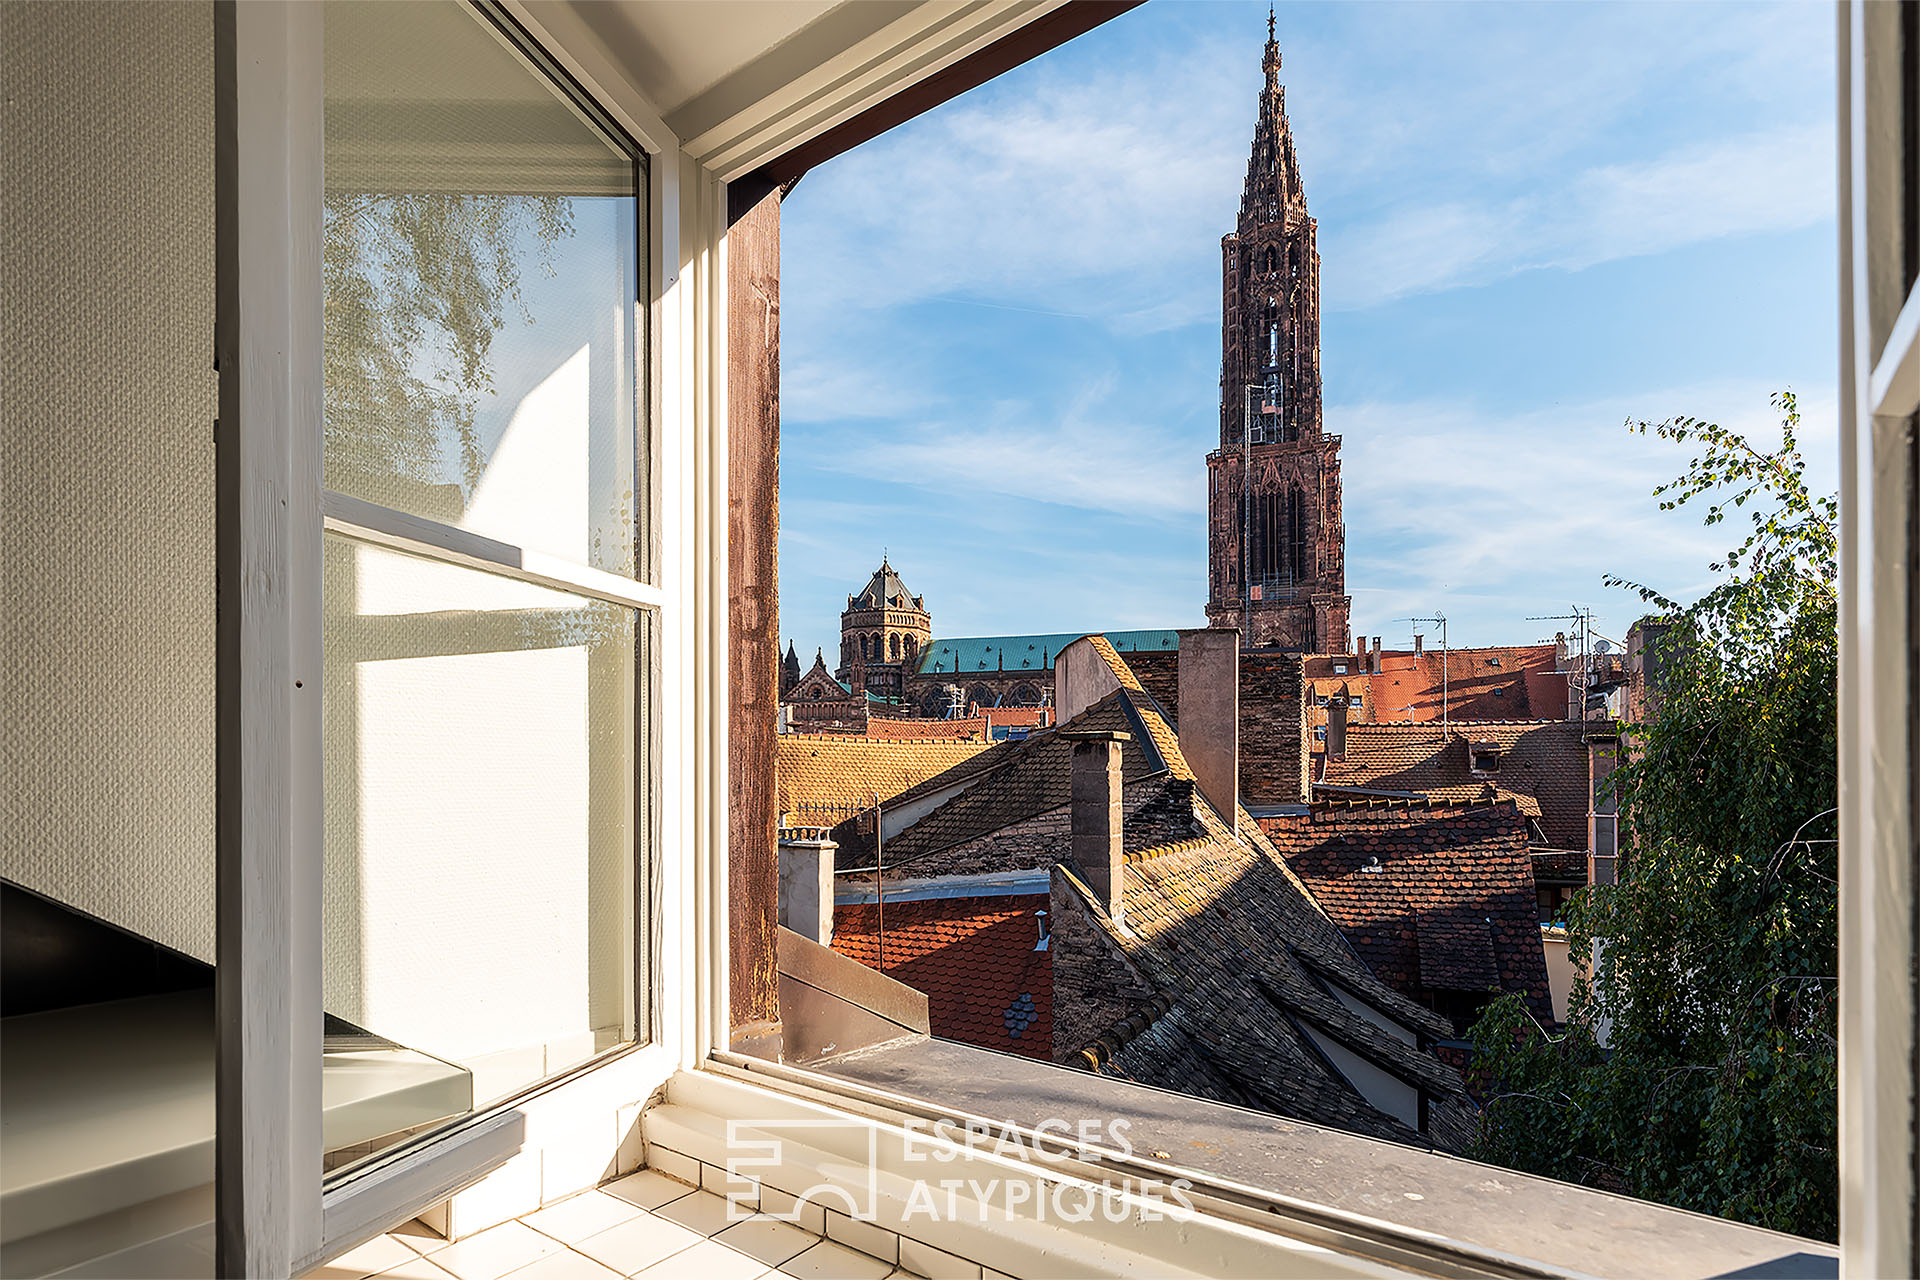 Already rented : Duplex carré d’or and its terrace with a view of the cathedral